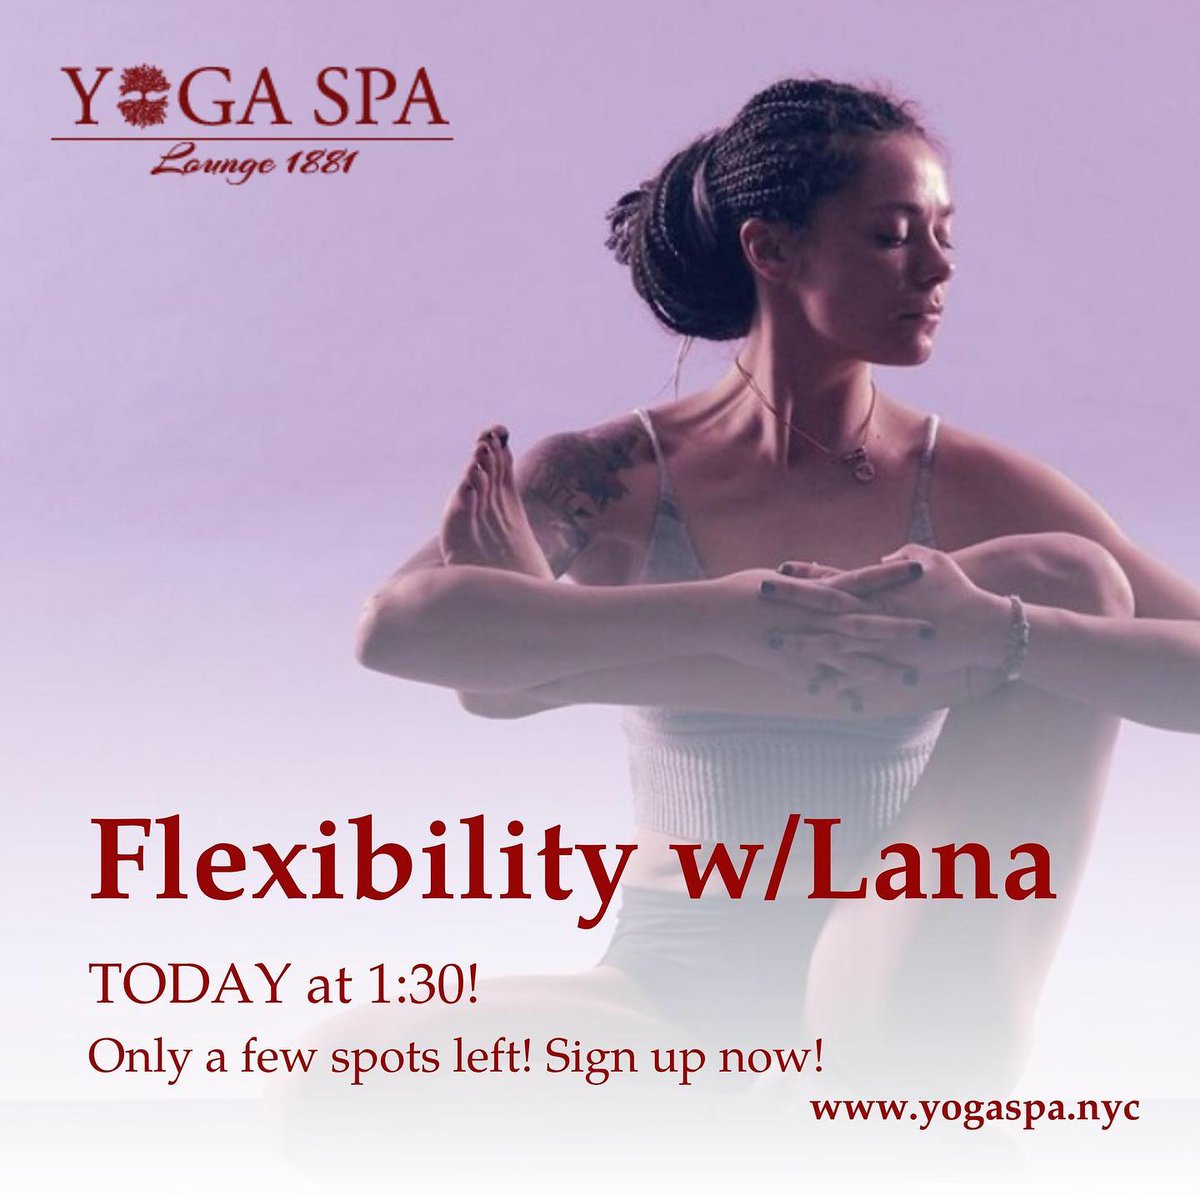 Our new specialty class today with Lana  has a few spots left! Sign up now and join us for a special #Flexibility class with Lana!!
#yoga #stretching #selfcare #vinyasa #yogalifestyle #nycyoga #valentinesyoga #specialclass #yogalife #yoganyc #destress #couplesyoga #treaturself